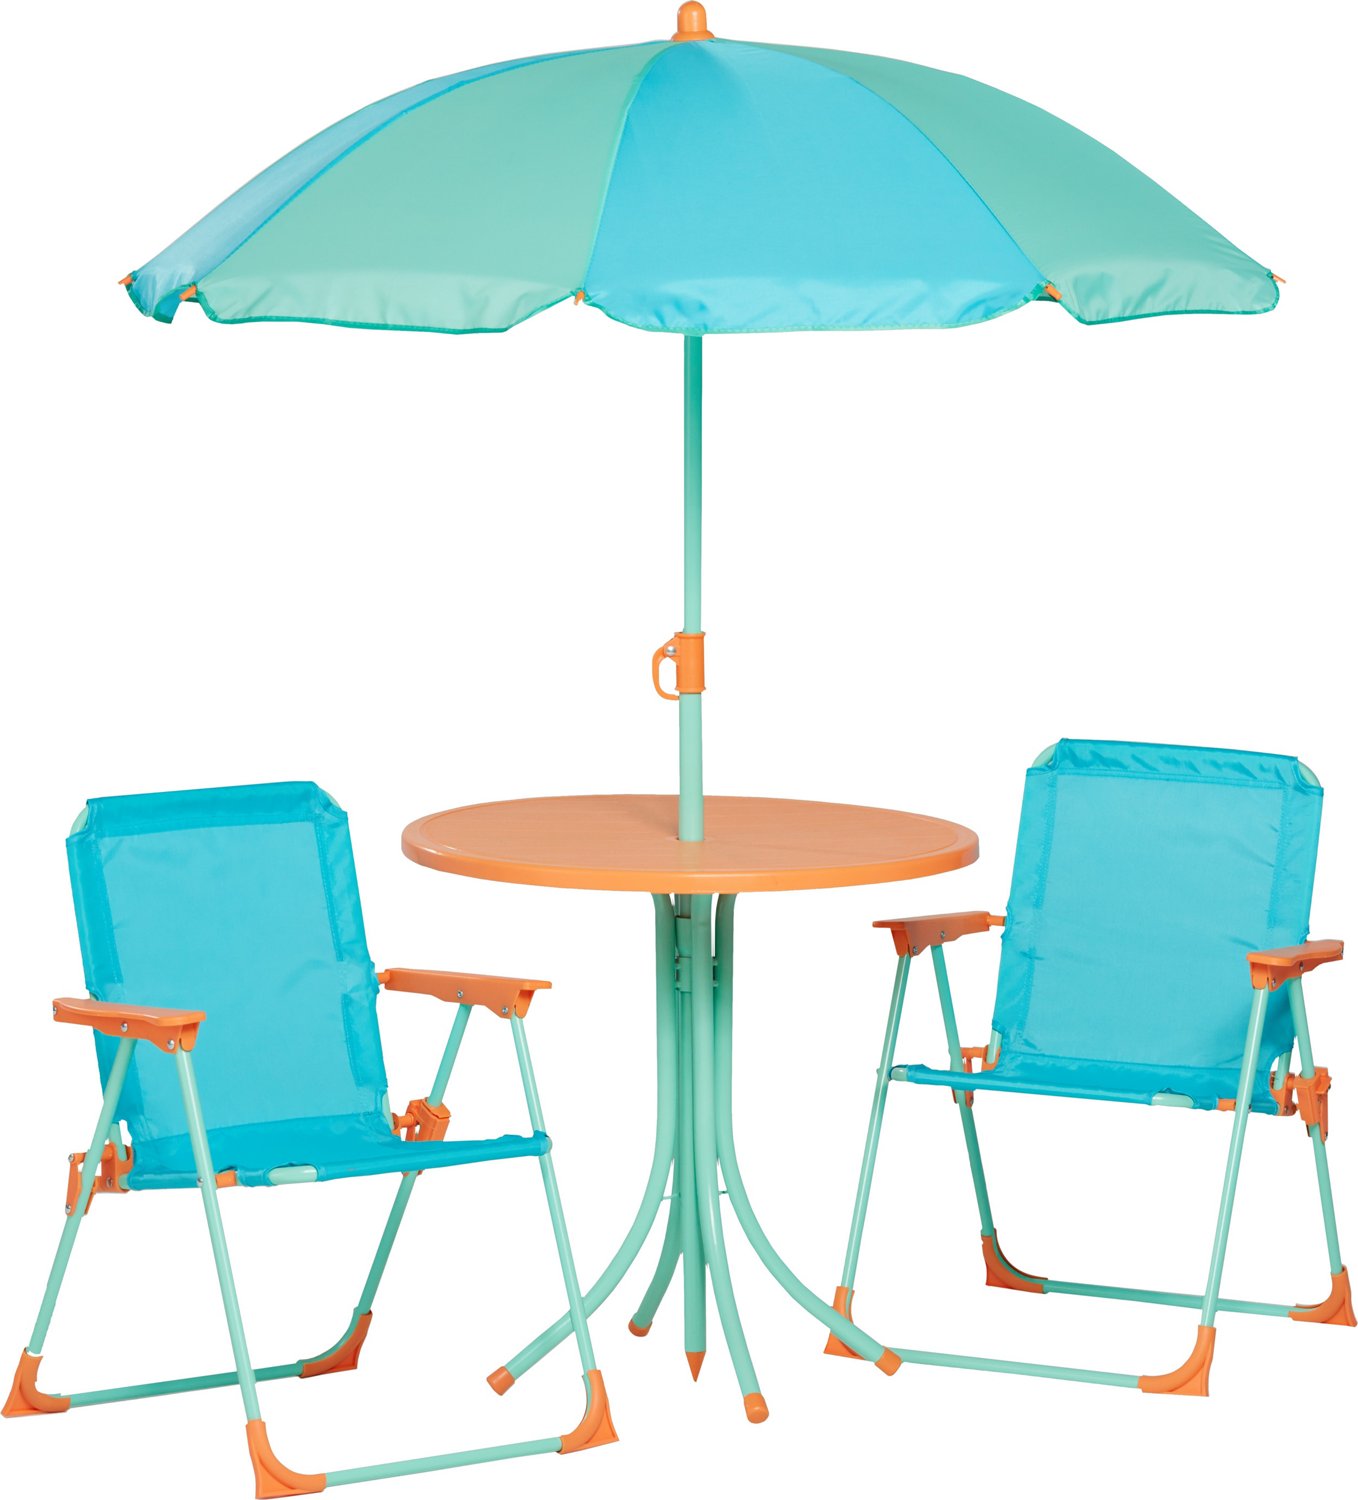 Barton 6 Piece Outdoor Patio Garden Dining Set with Table Umbrella and 4  Foldable Chairs, Beige/Brown - Walmart.com